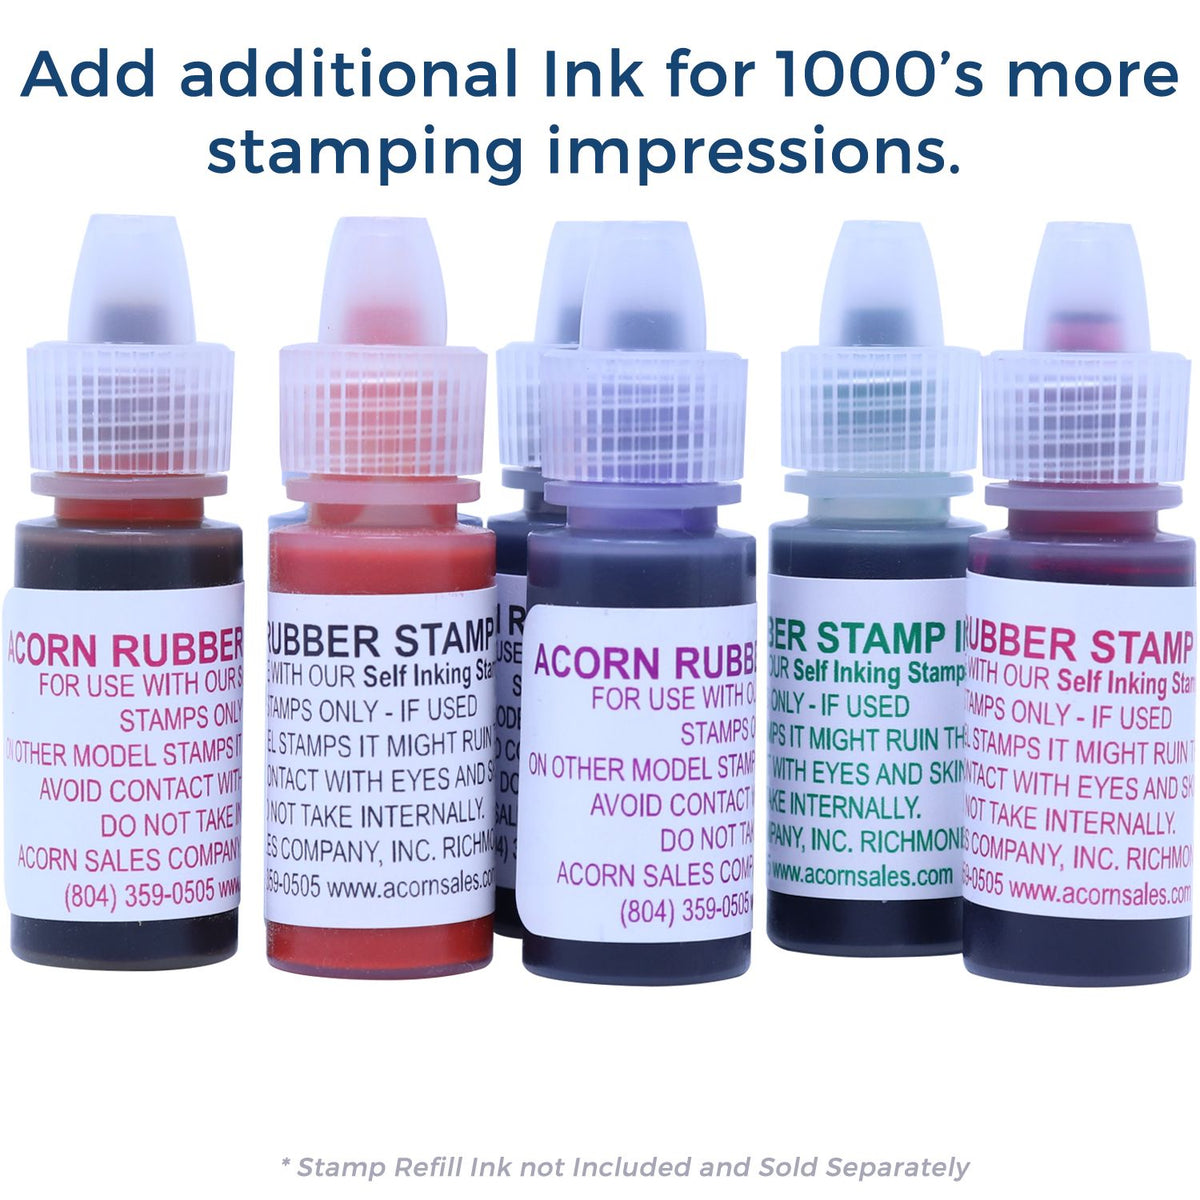 Refill Inks for Large Pre-Inked Billed with Date Box Stamp Available